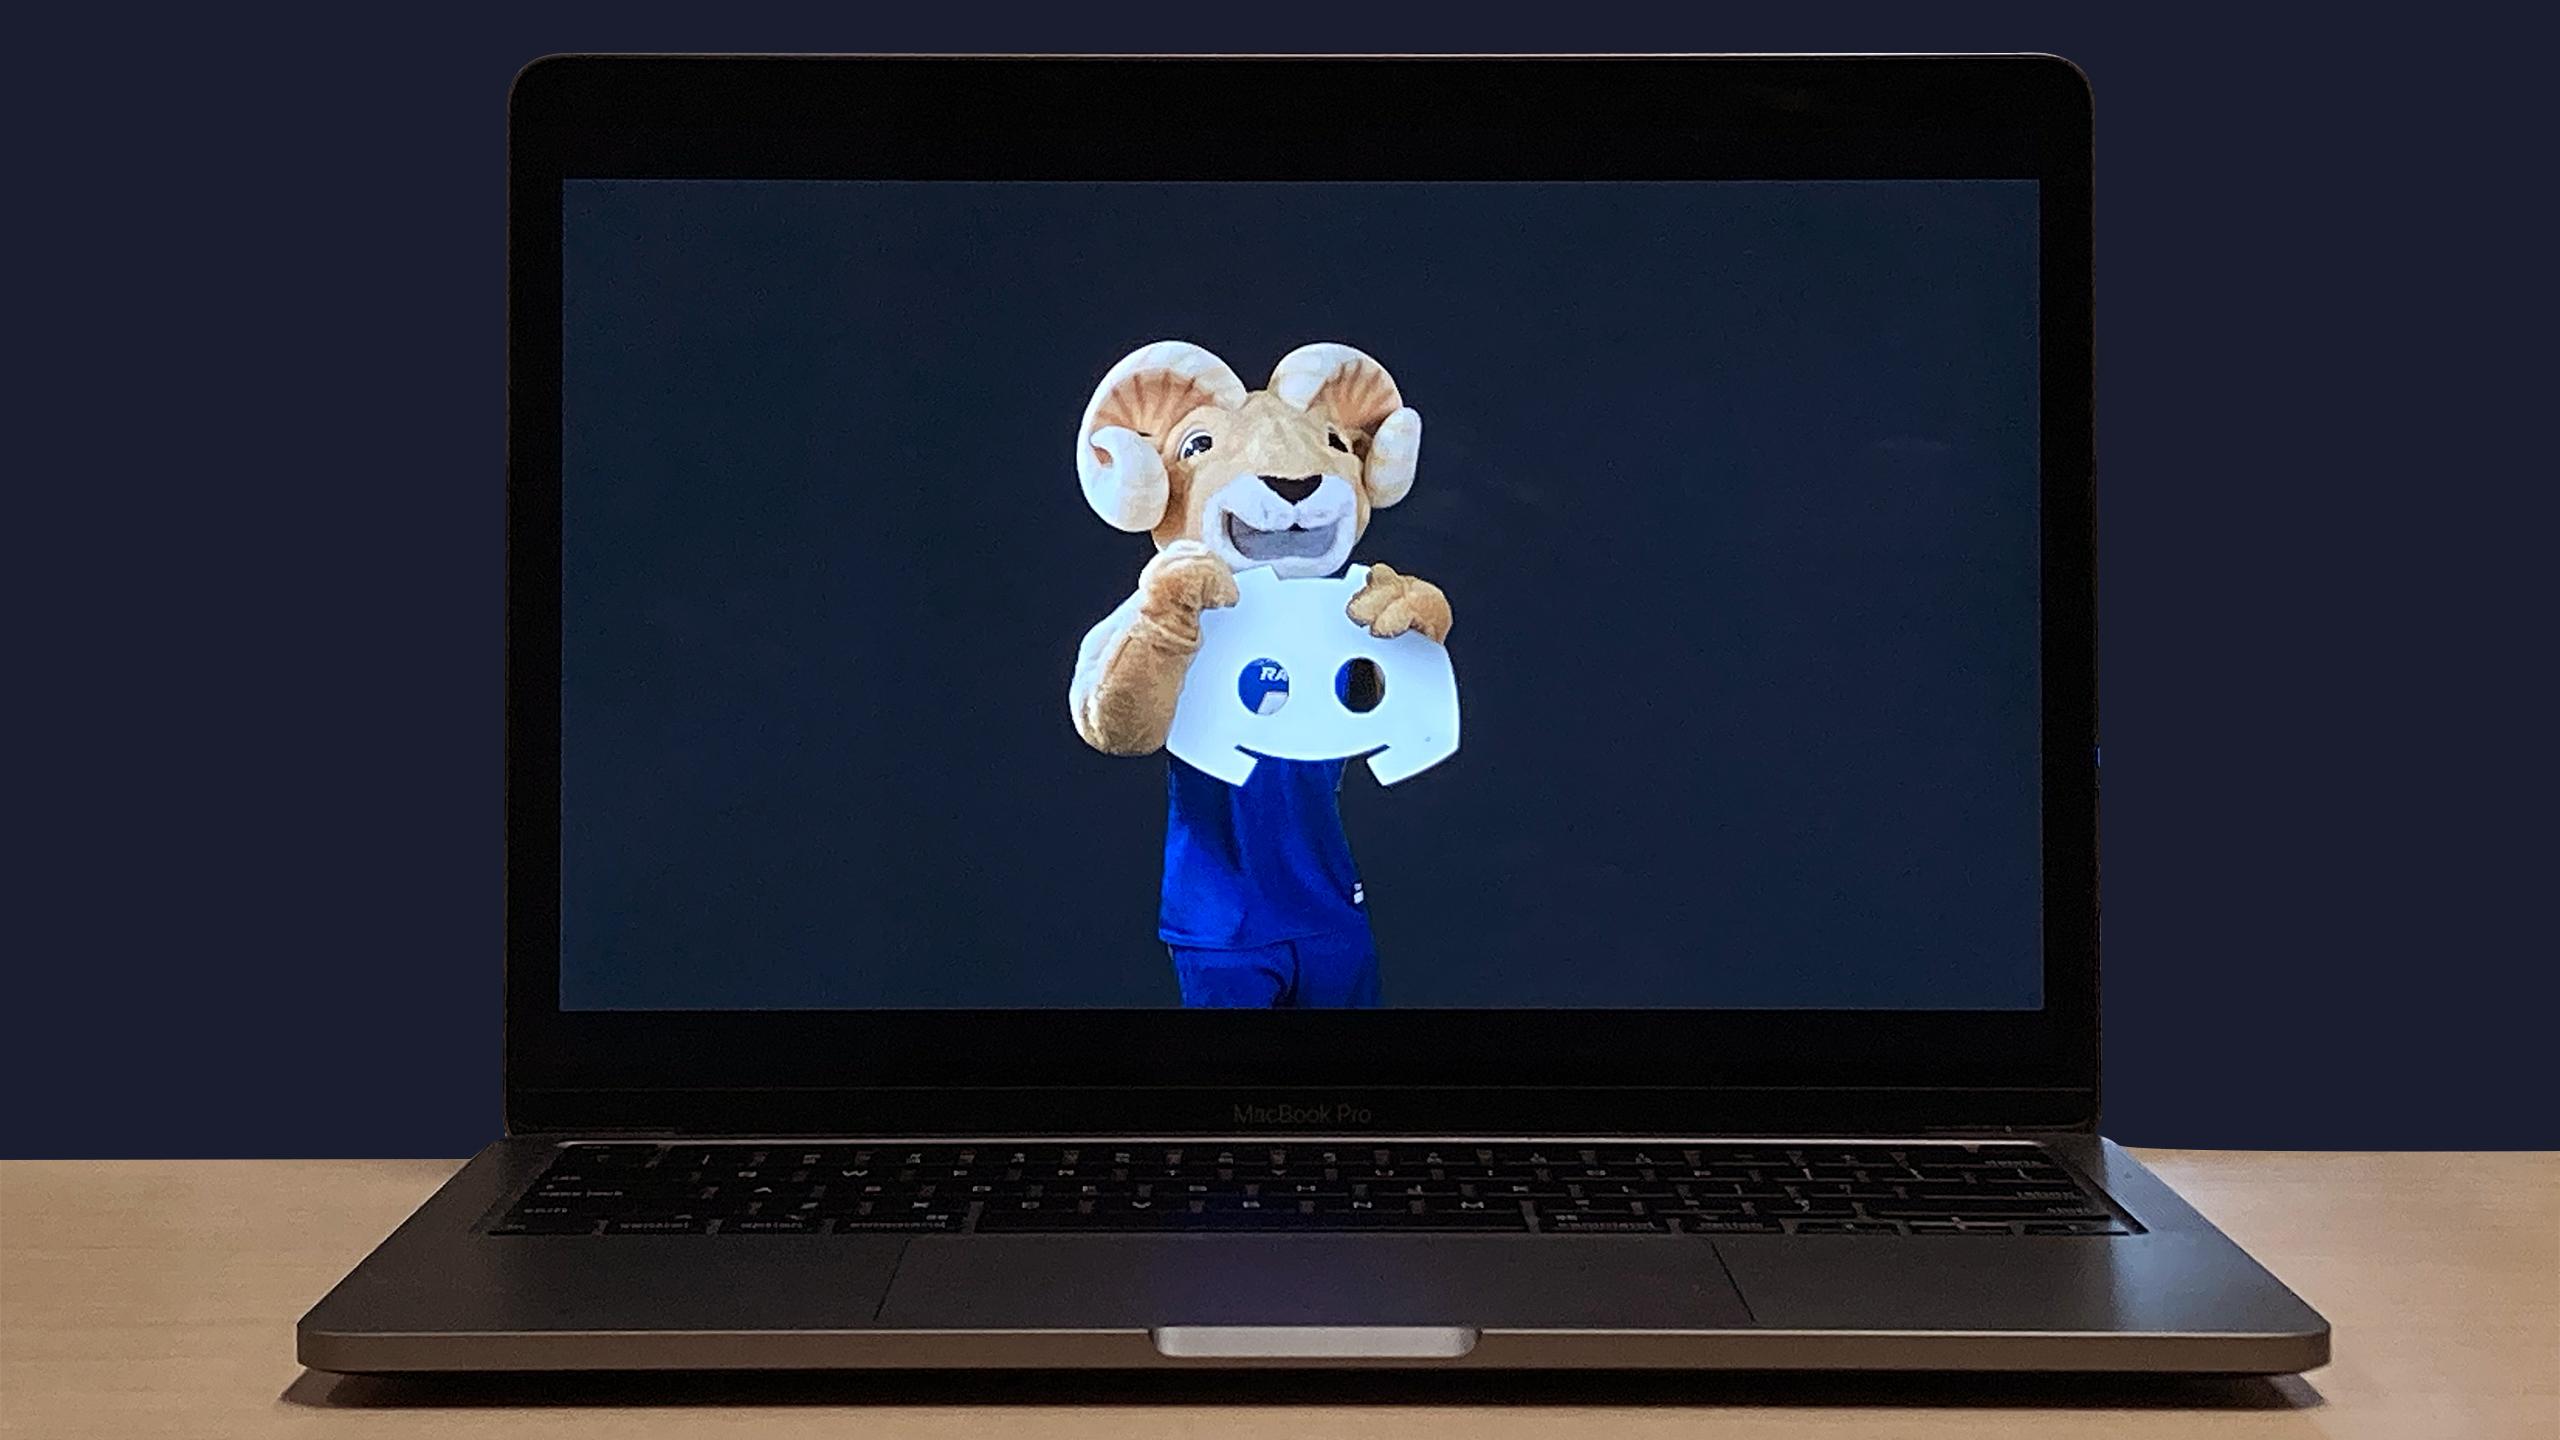 A laptop showing Eggy the Ram holding the Discord logo